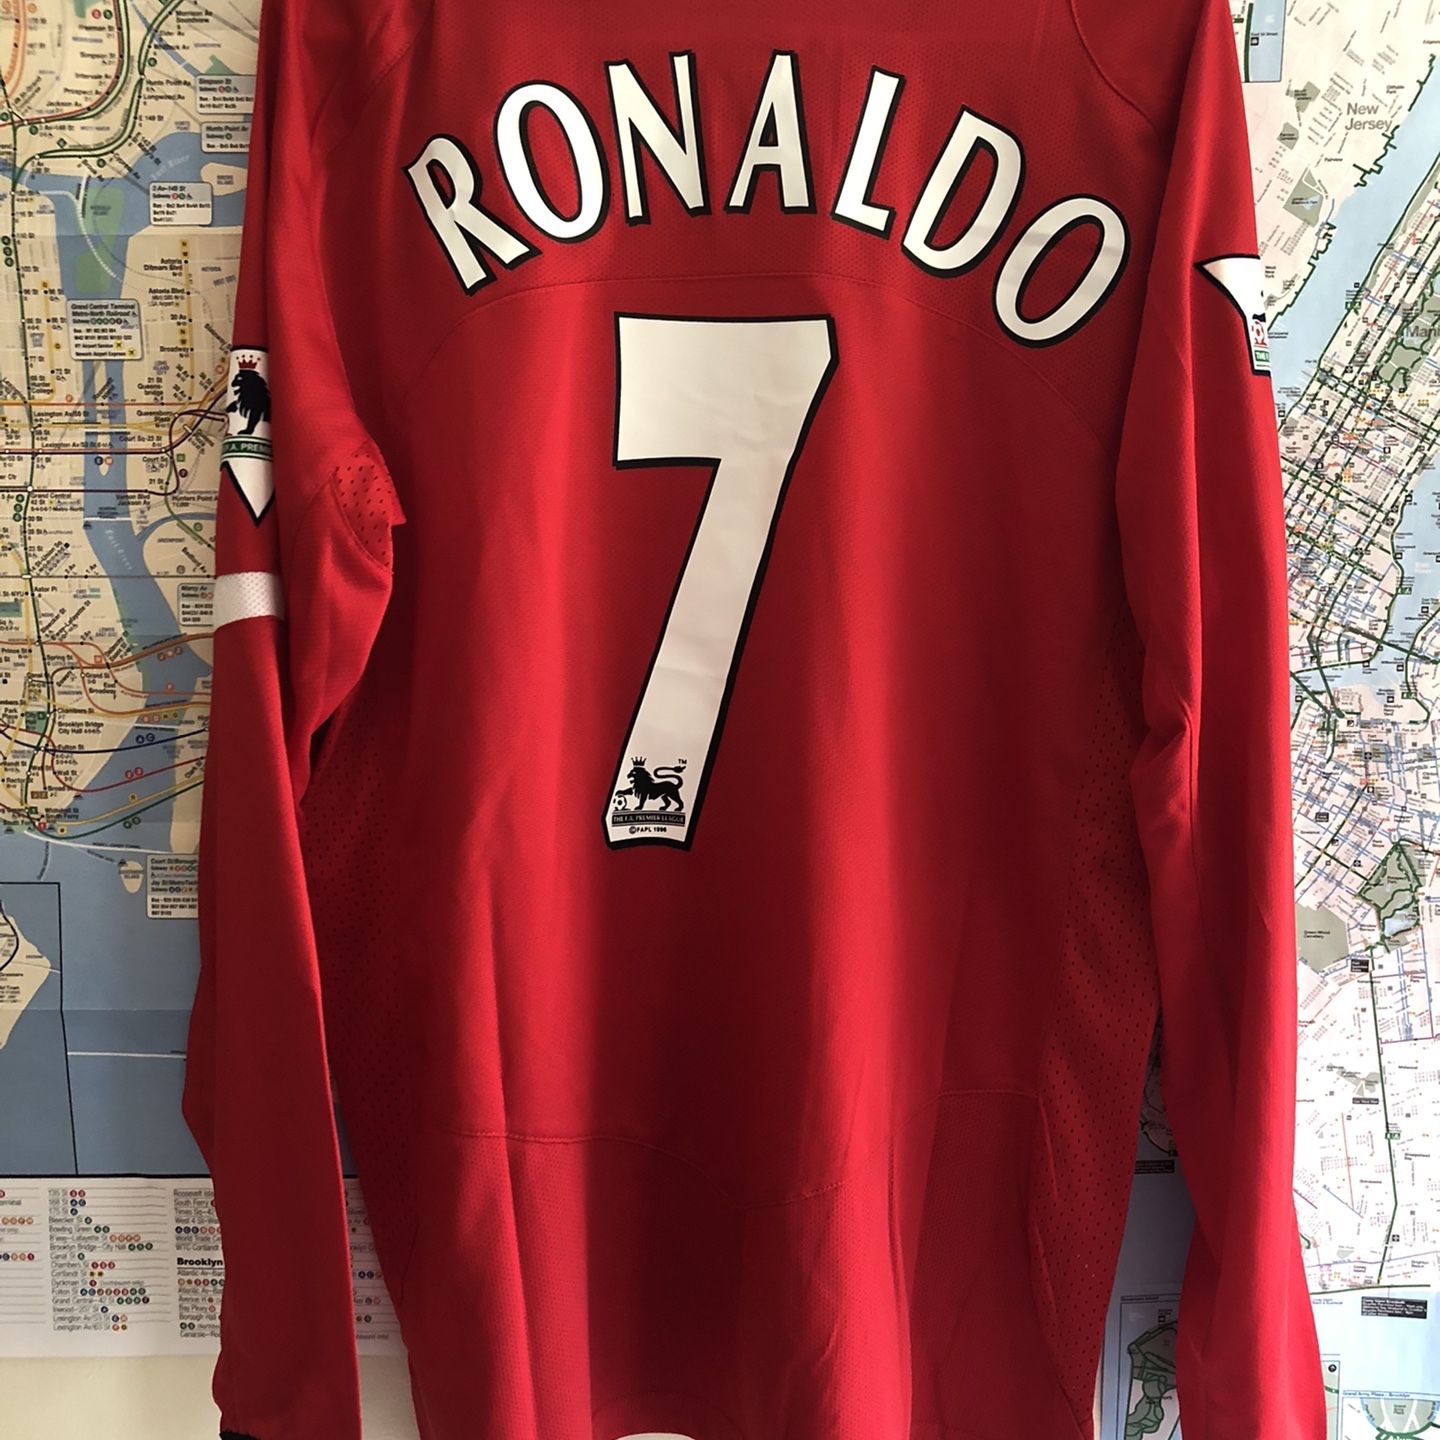 Cristiano Ronaldo - Manchester United Soccer Jersey - Retro Vintage Jersey  - Champions League 2008 Final Jersey - Brand New - Size XL / XXL for Sale  in River Grove, IL - OfferUp